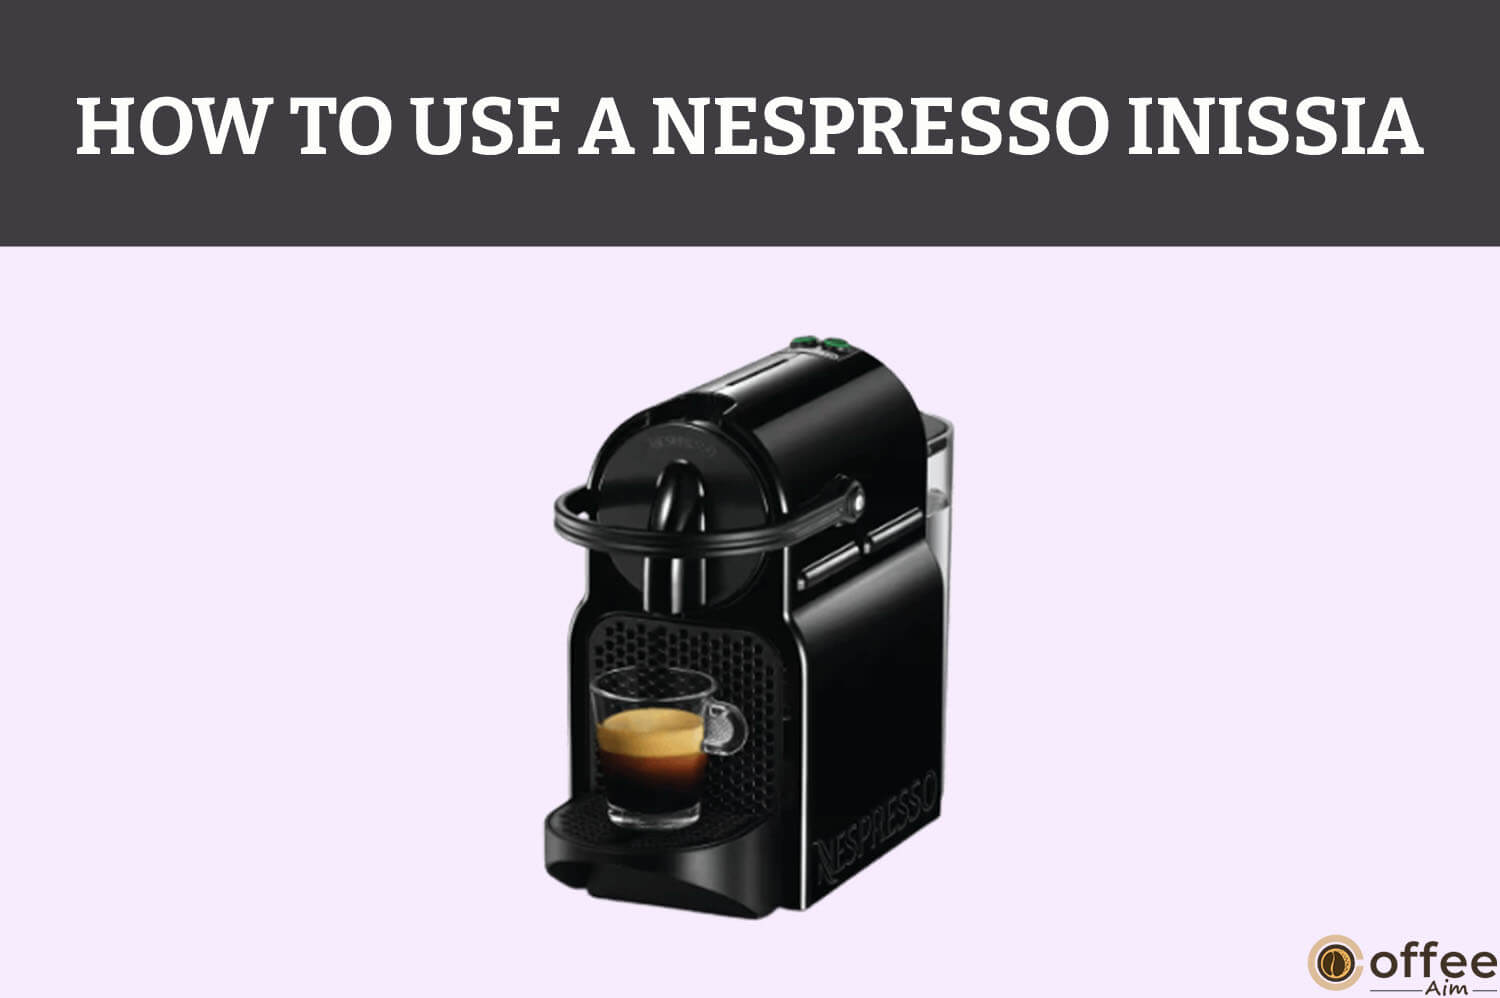 Featured image for the article "How to use A Nespresso Inissia"